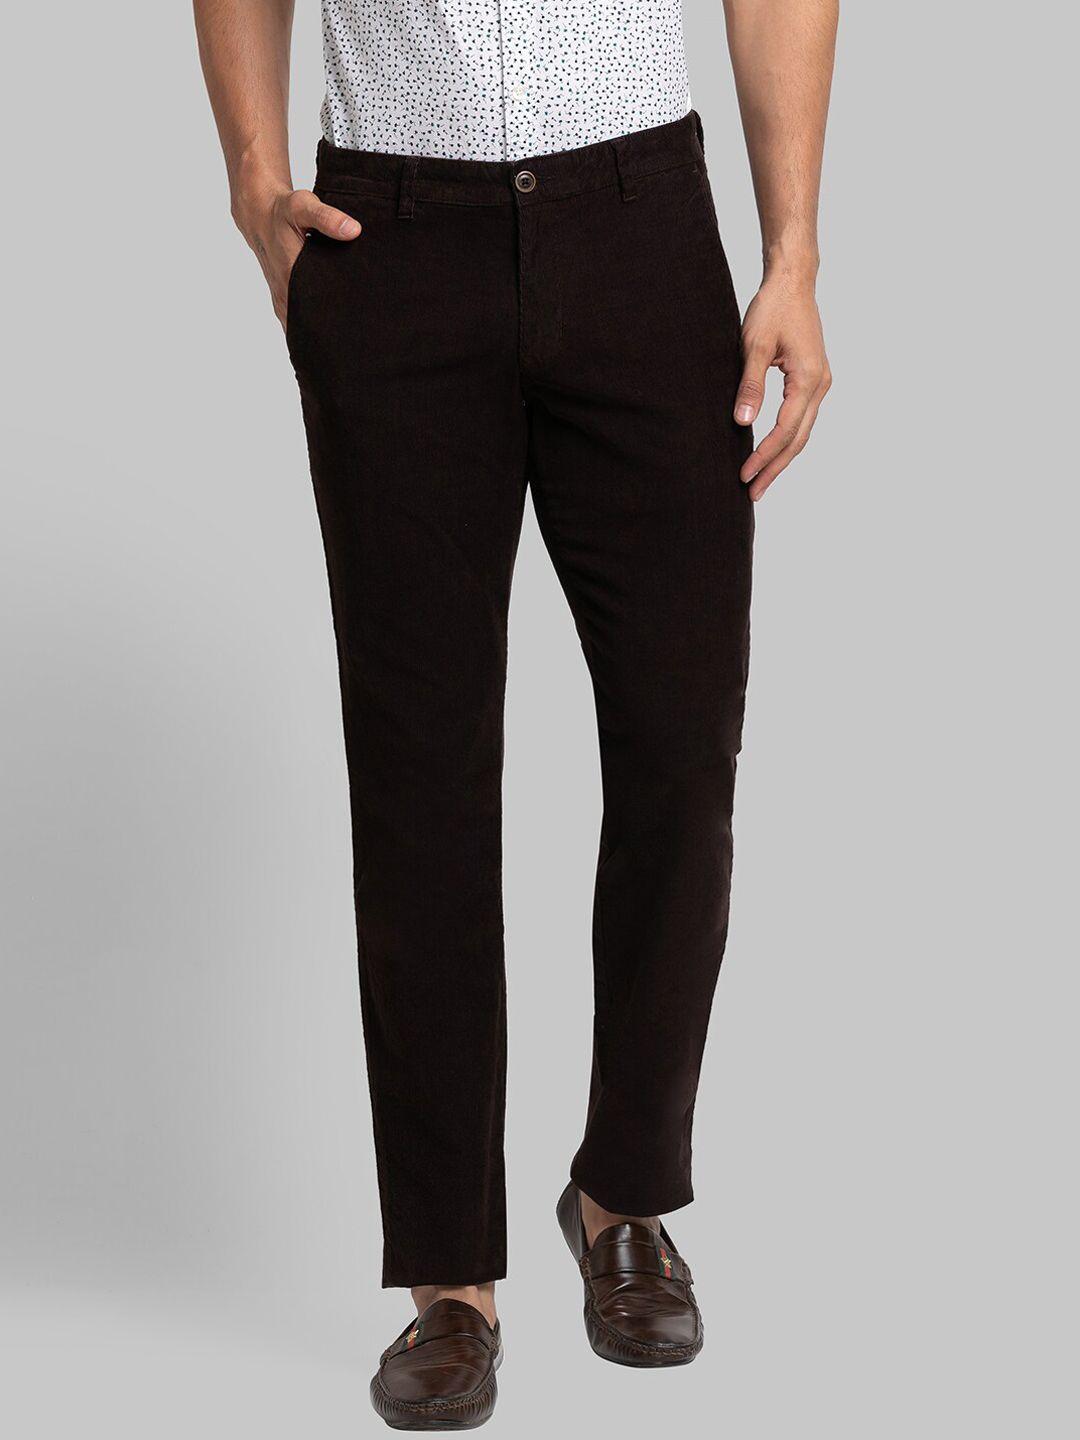 parx men brown tapered fit chinos trousers